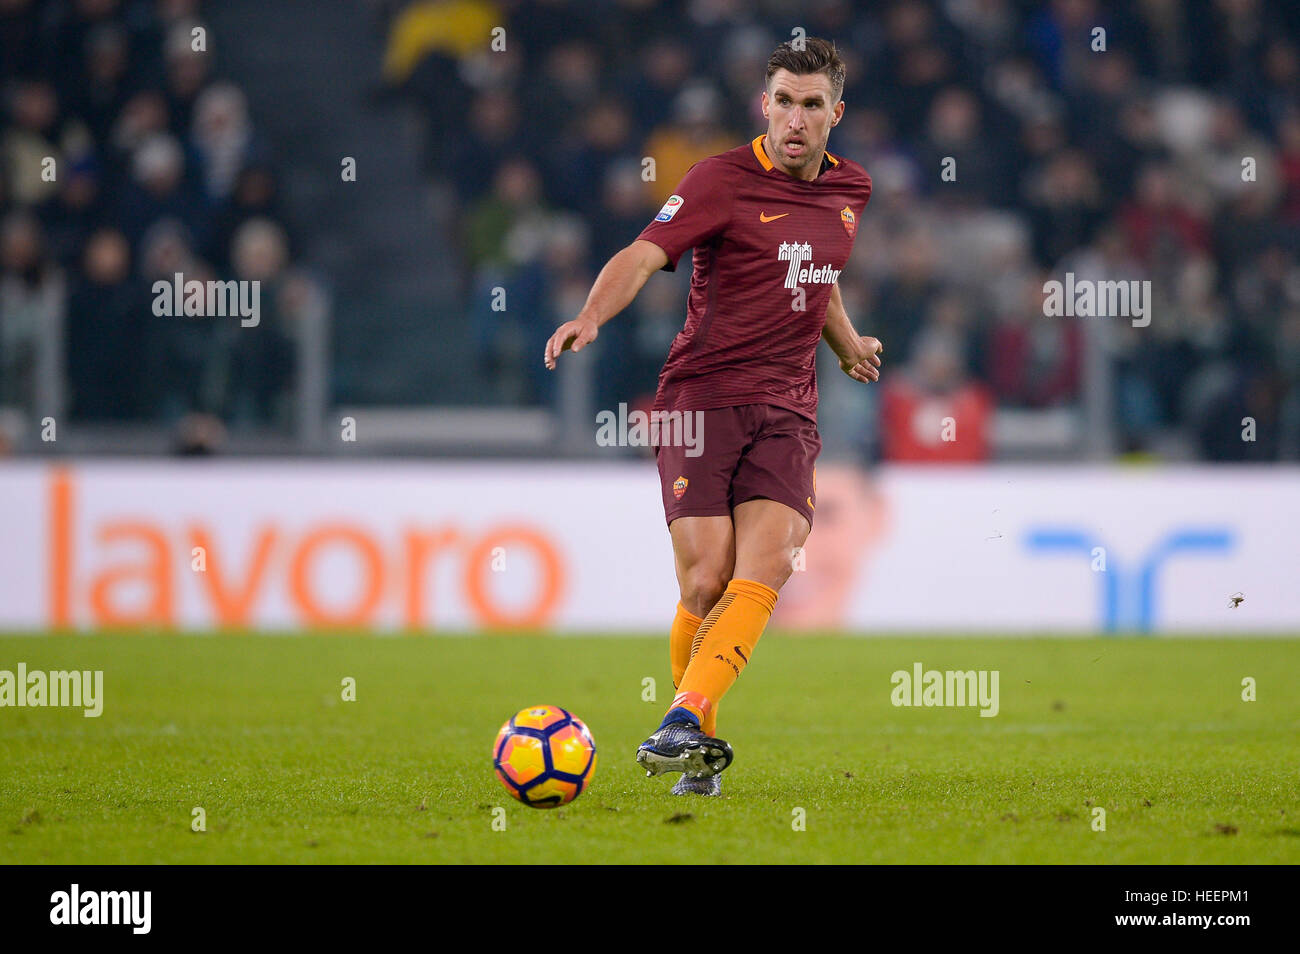 Turin, Italy. 2016, 17 december: Kevin Strootman of AS Roma in action during the Serie A football match between Juventus FC and AS Roma. Stock Photo